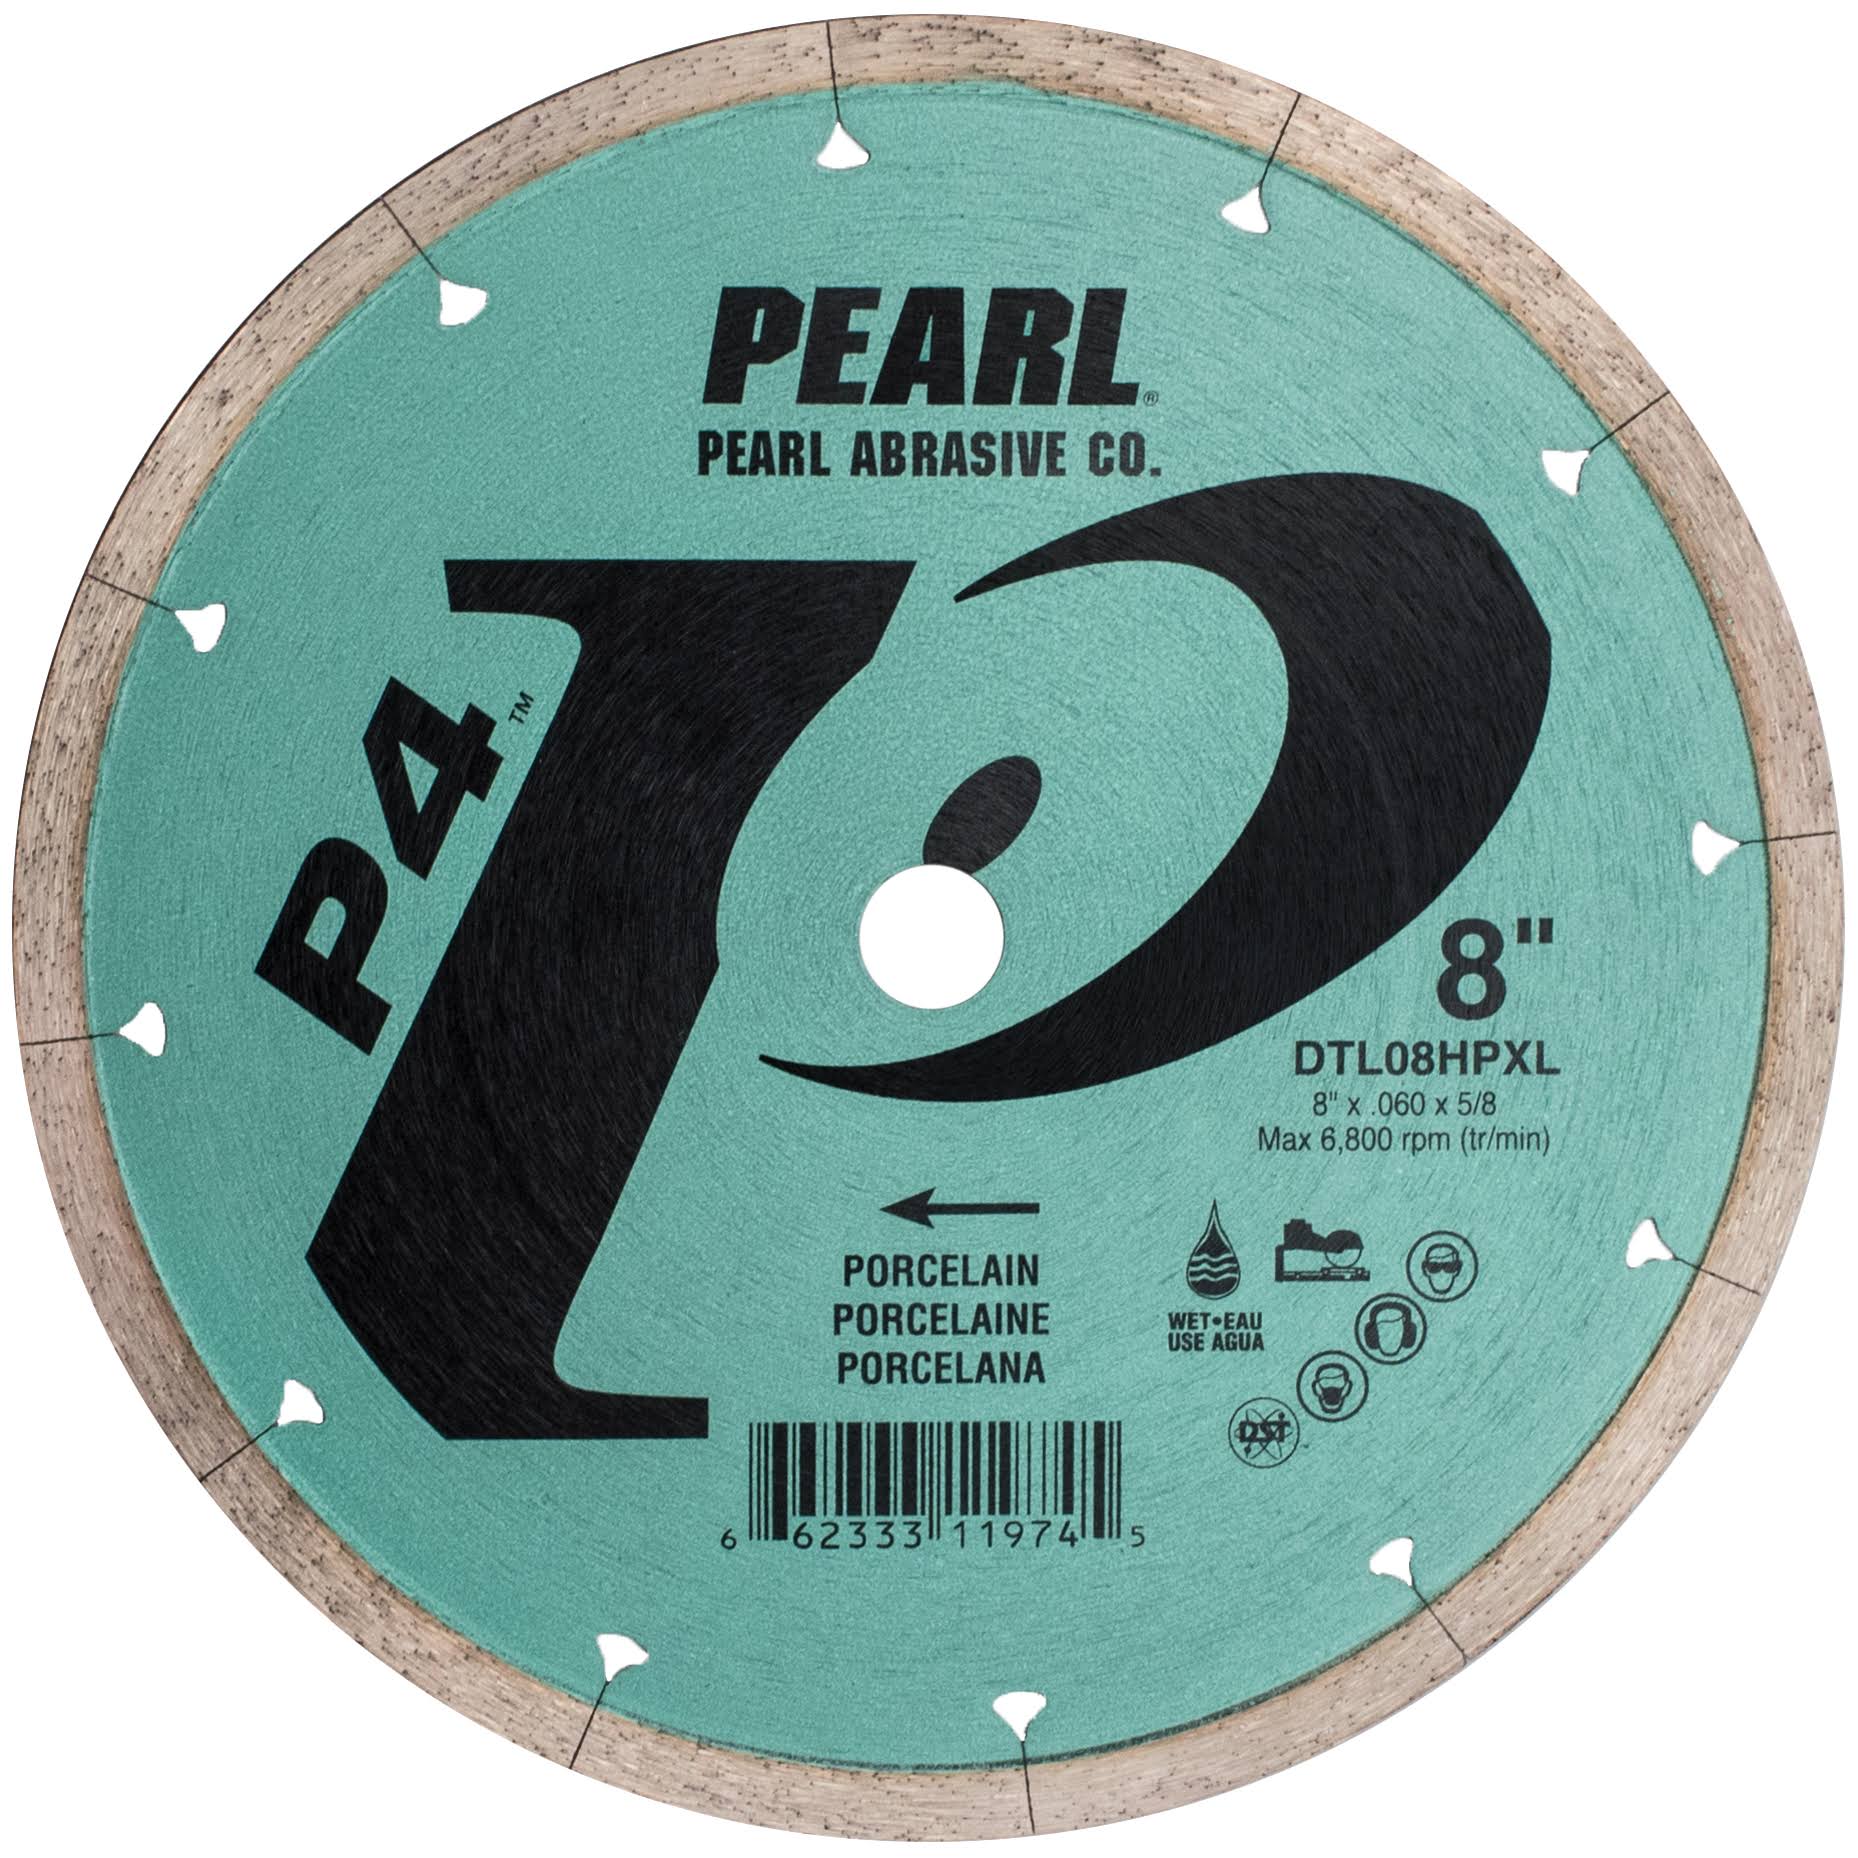 Pearl Abrasive P4 DTL10HPXL Tile and Stone Blade For Porcelain 10 x 060 x 5 8